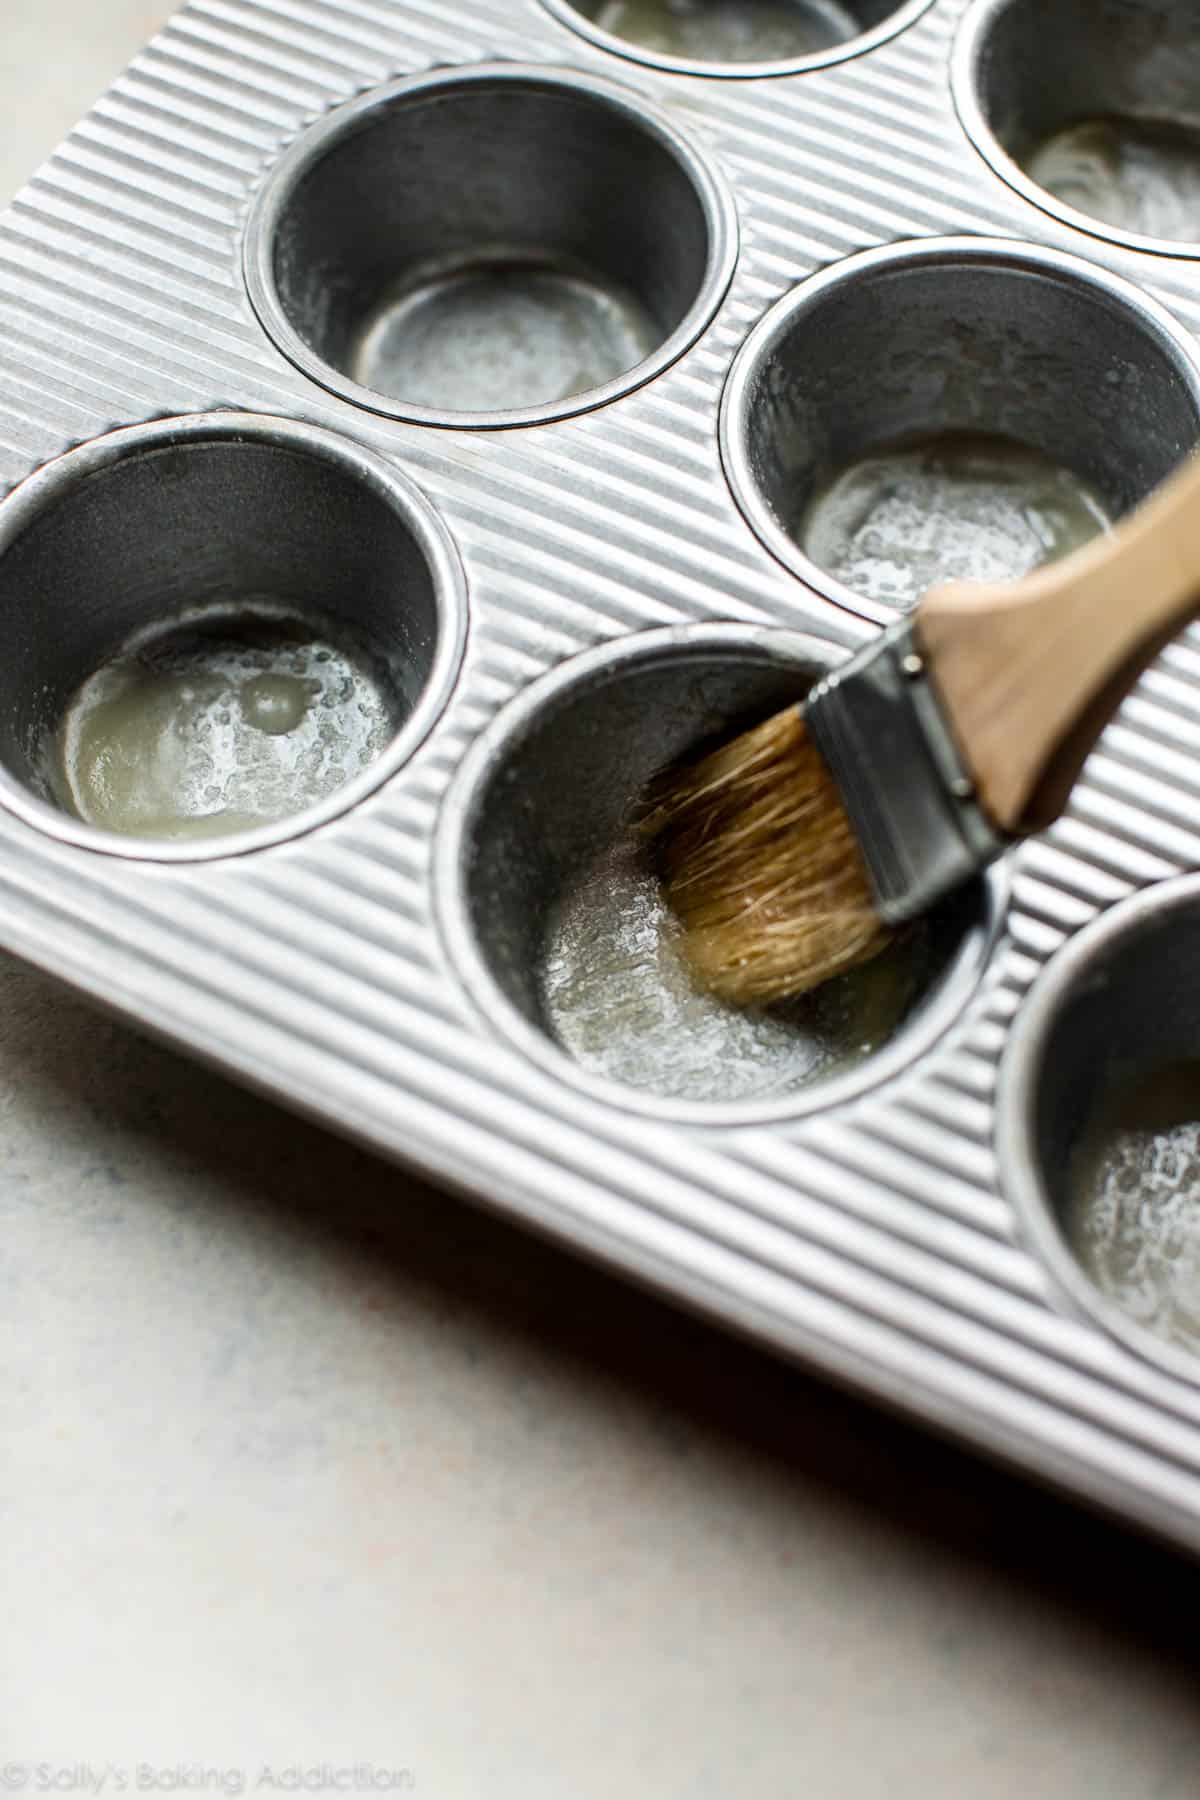 Brushing the muffin pan with melted butter and sugar